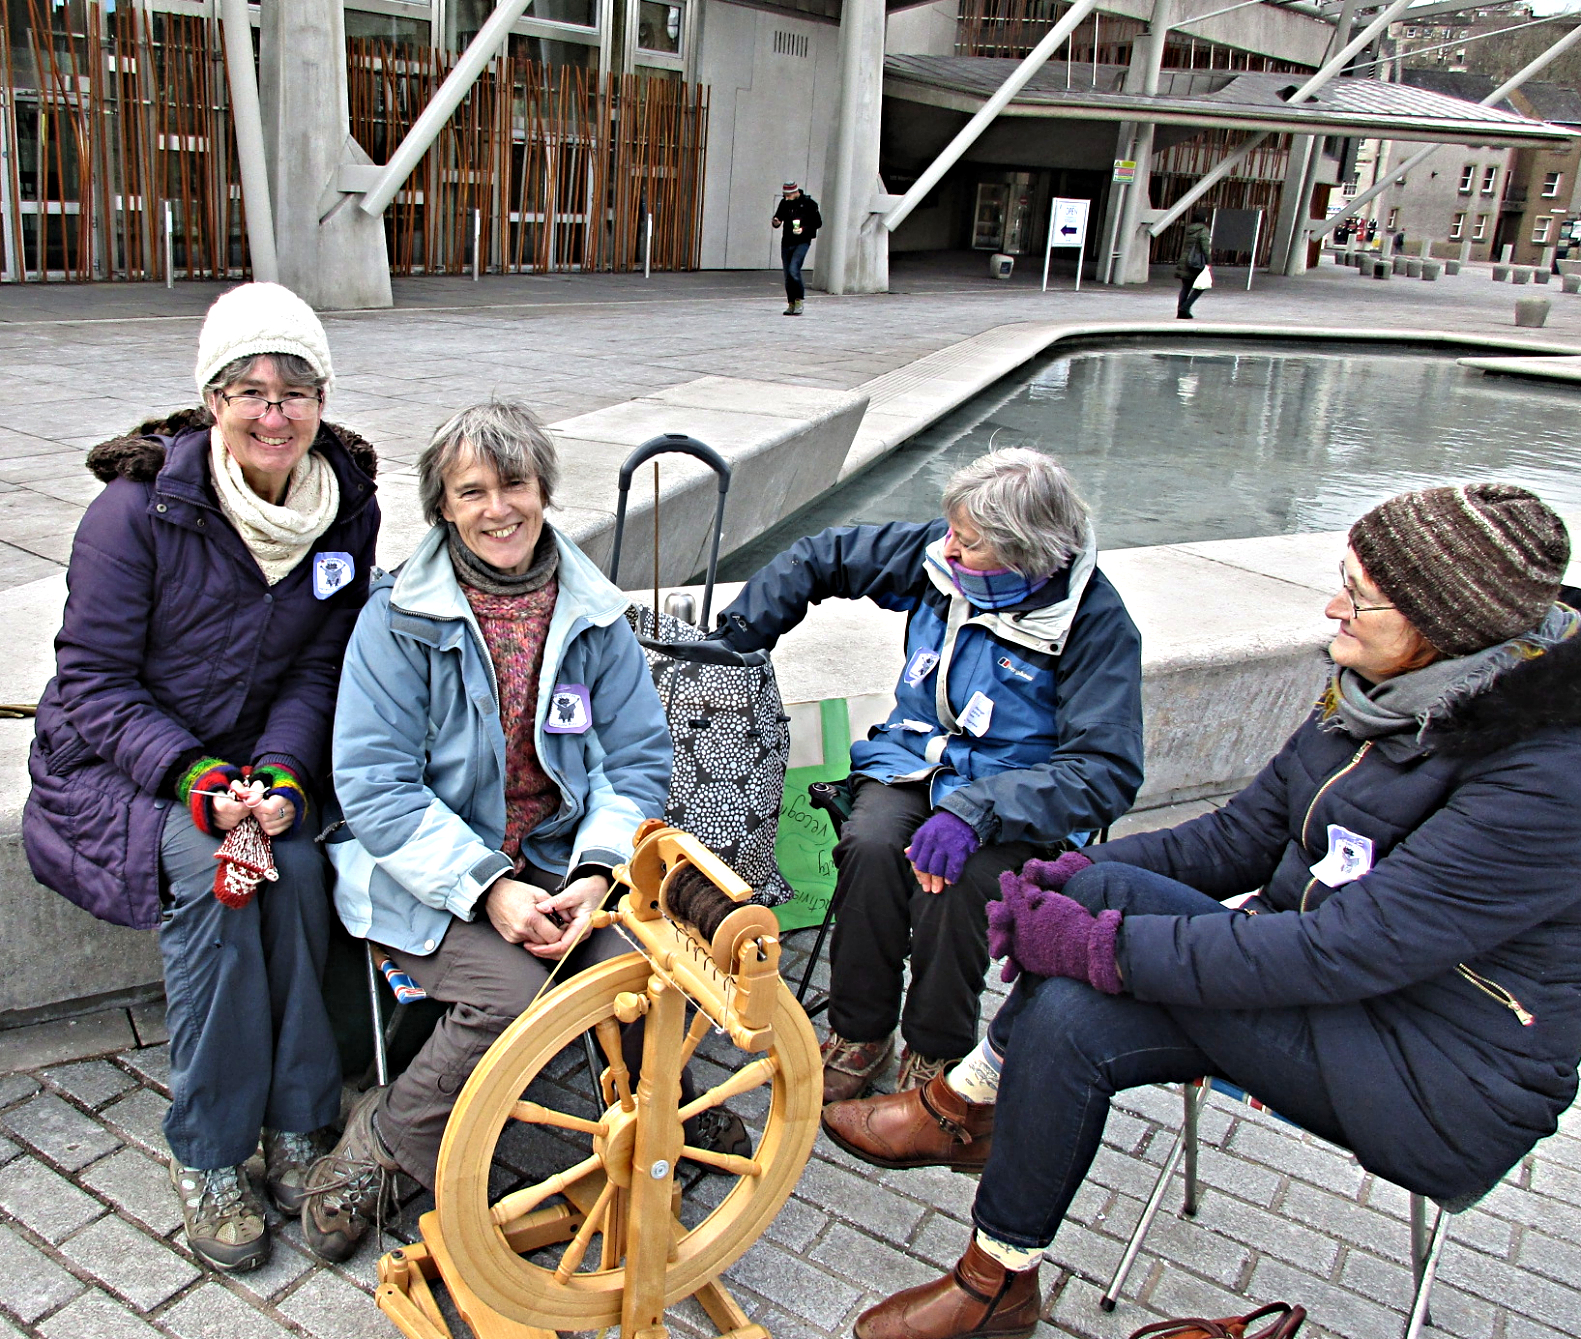 Knitting & spinning yarn in front of the Scottish Parliament for International Women's Day